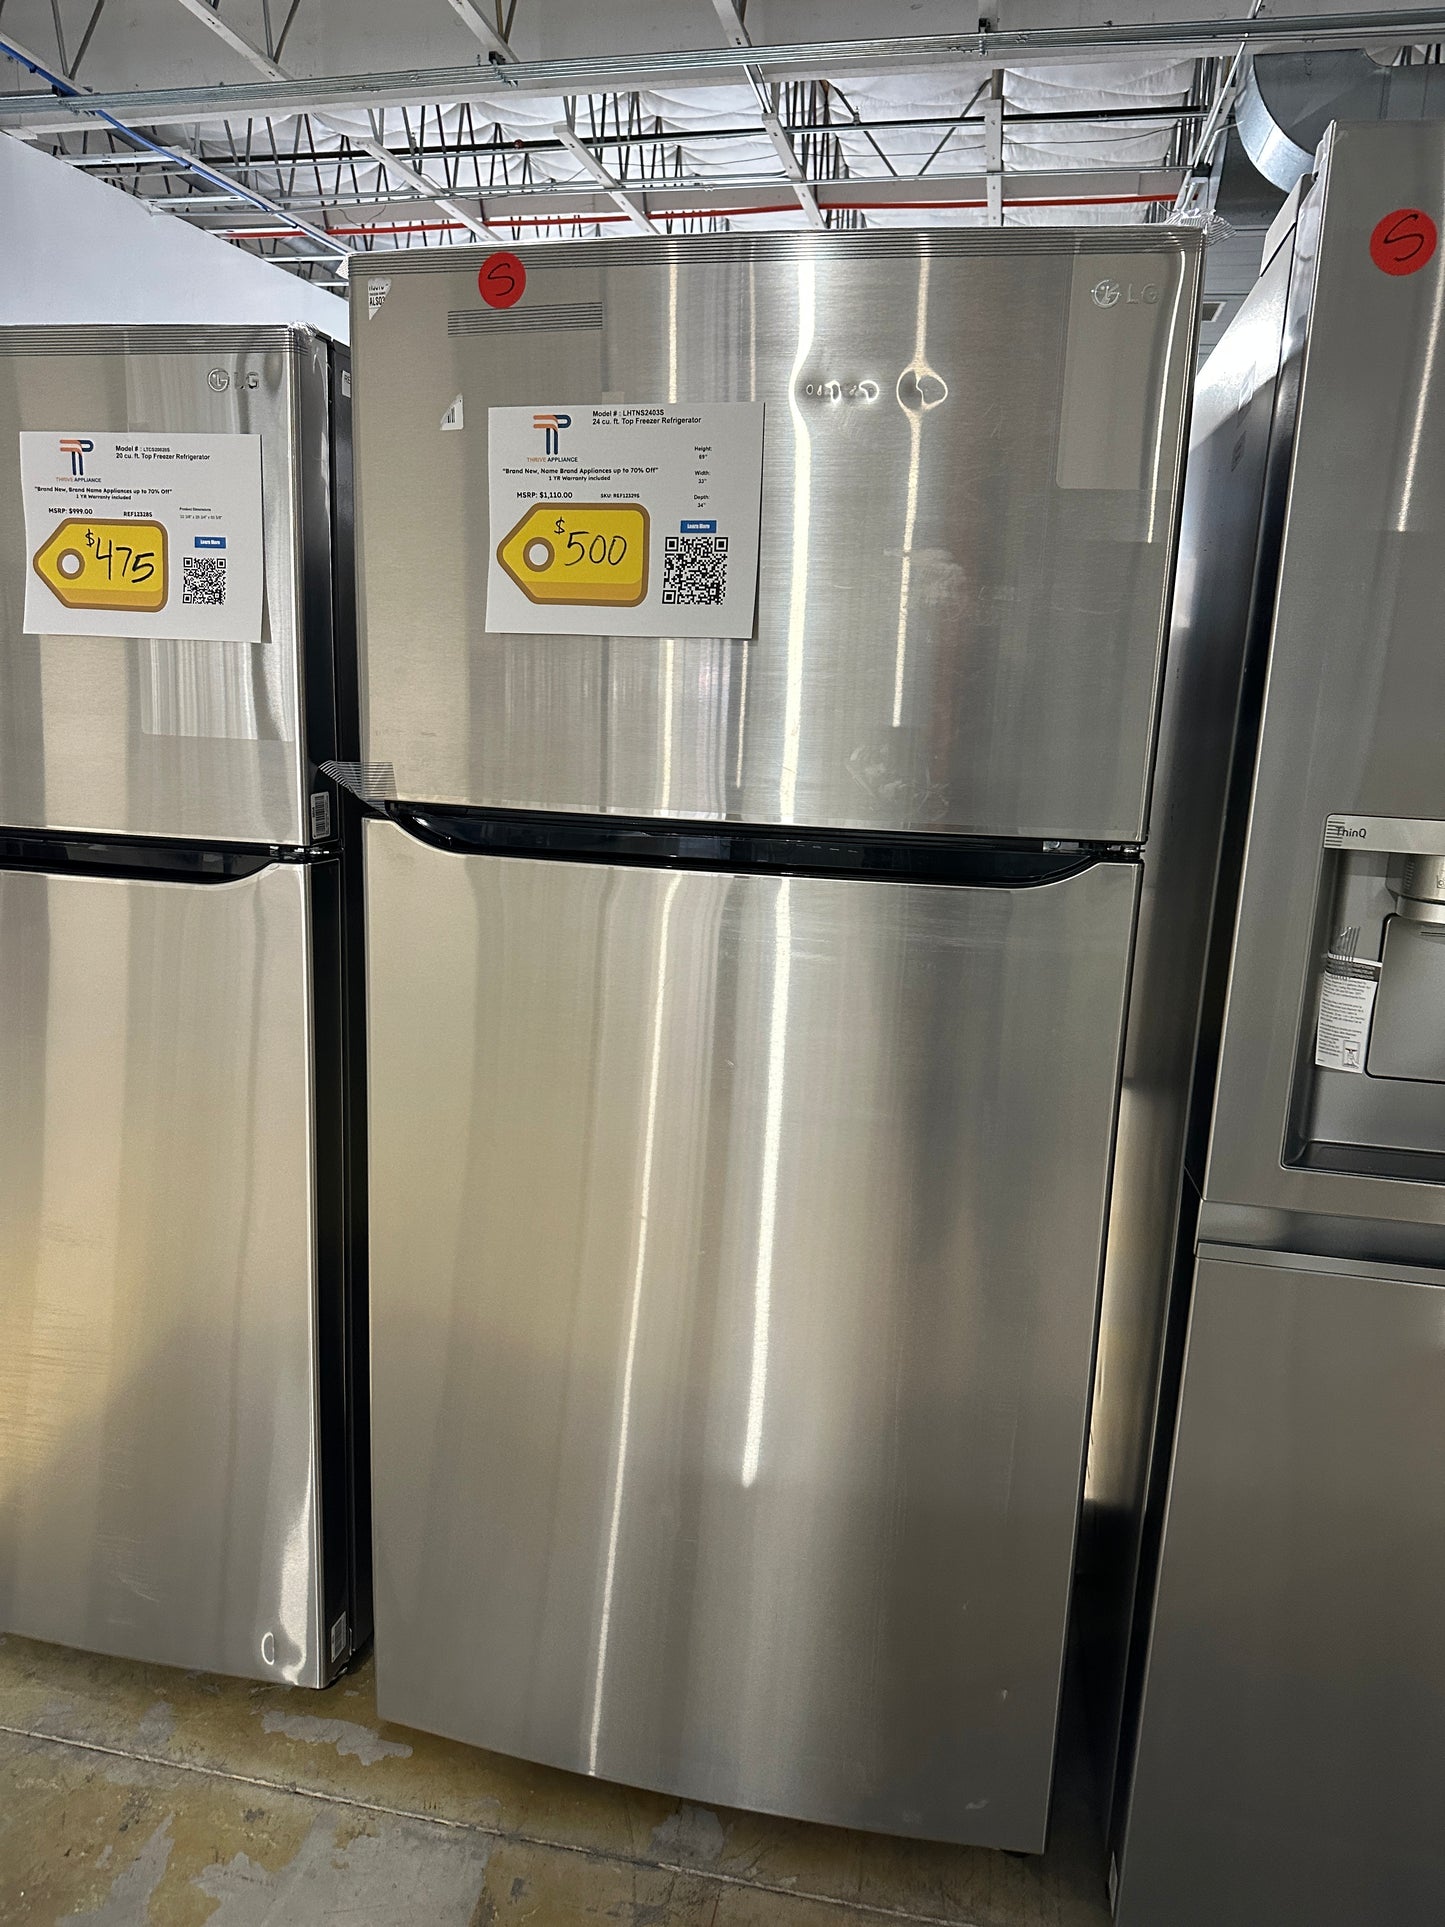 GREAT NEW LG REFRIGERATOR WITH INTERNAL WATER DISPENSER MODEL: LHTNS2403S  REF12329S